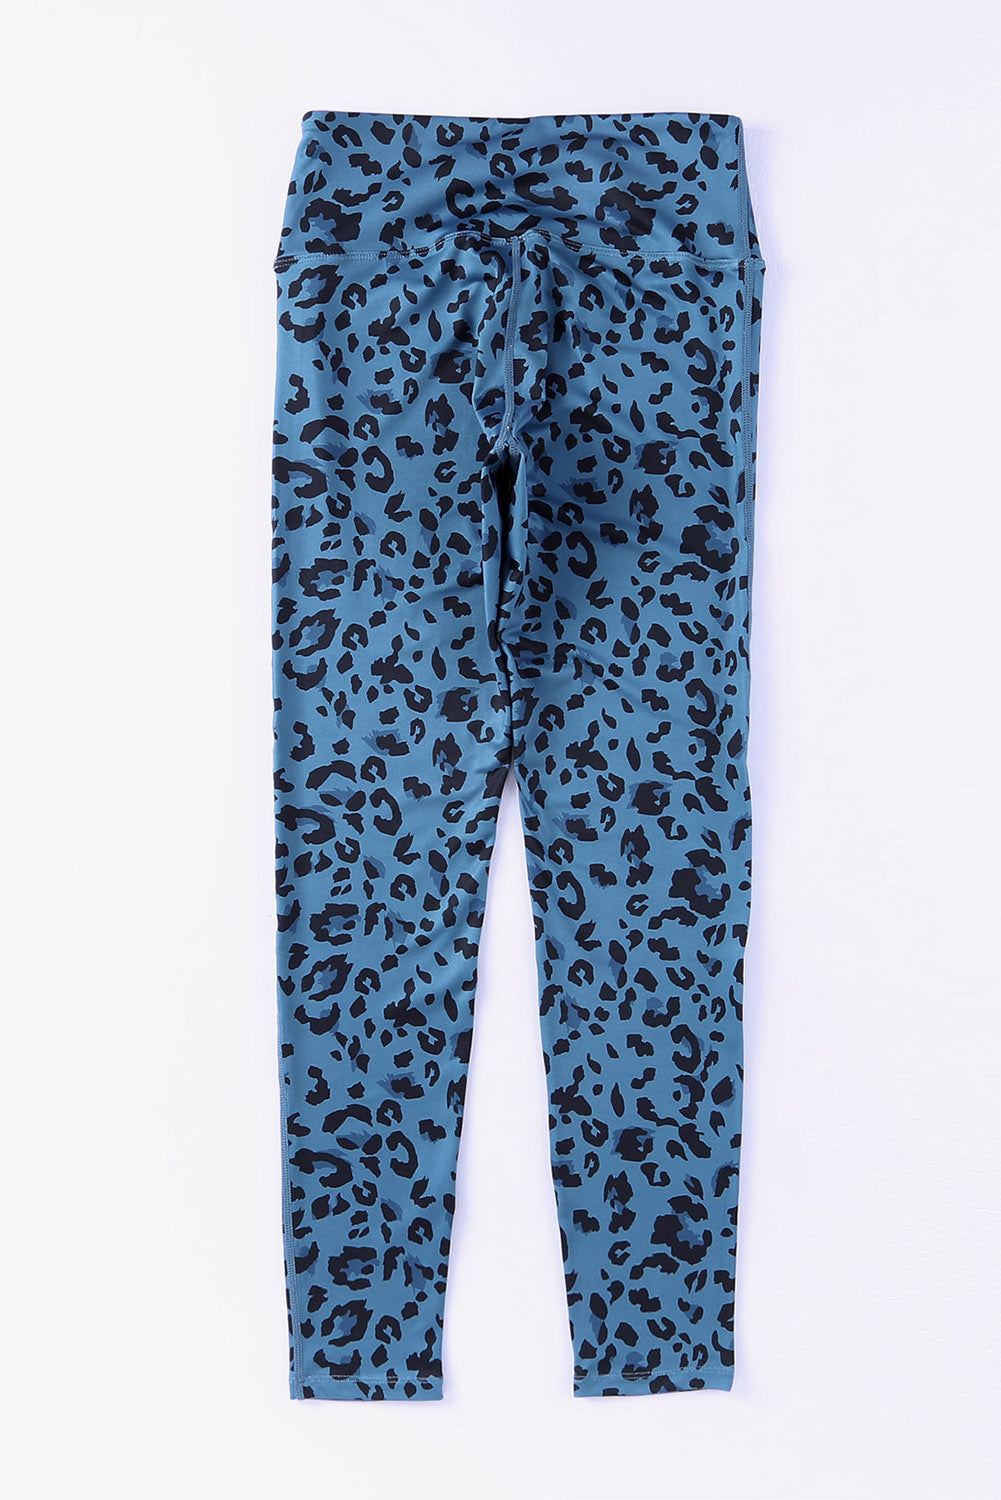 Leopard Print Wide Waistband Leggings Print on any thing USA/STOD clothes